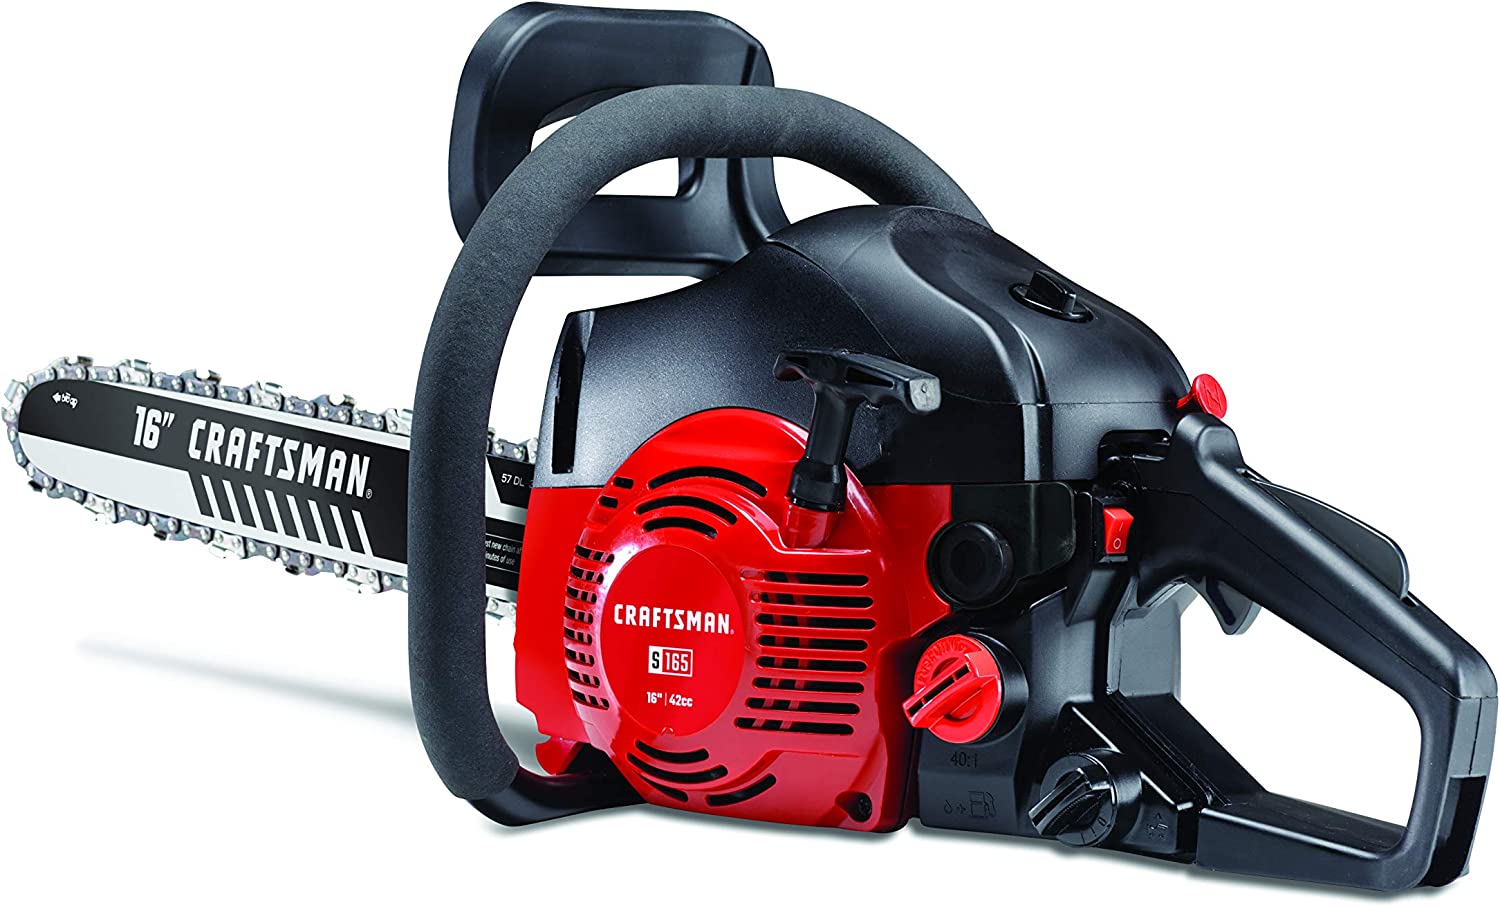 CRAFTSMAN Gas Powered Chainsaw, 16-inch, 42cc, 2-Cycle (S165)